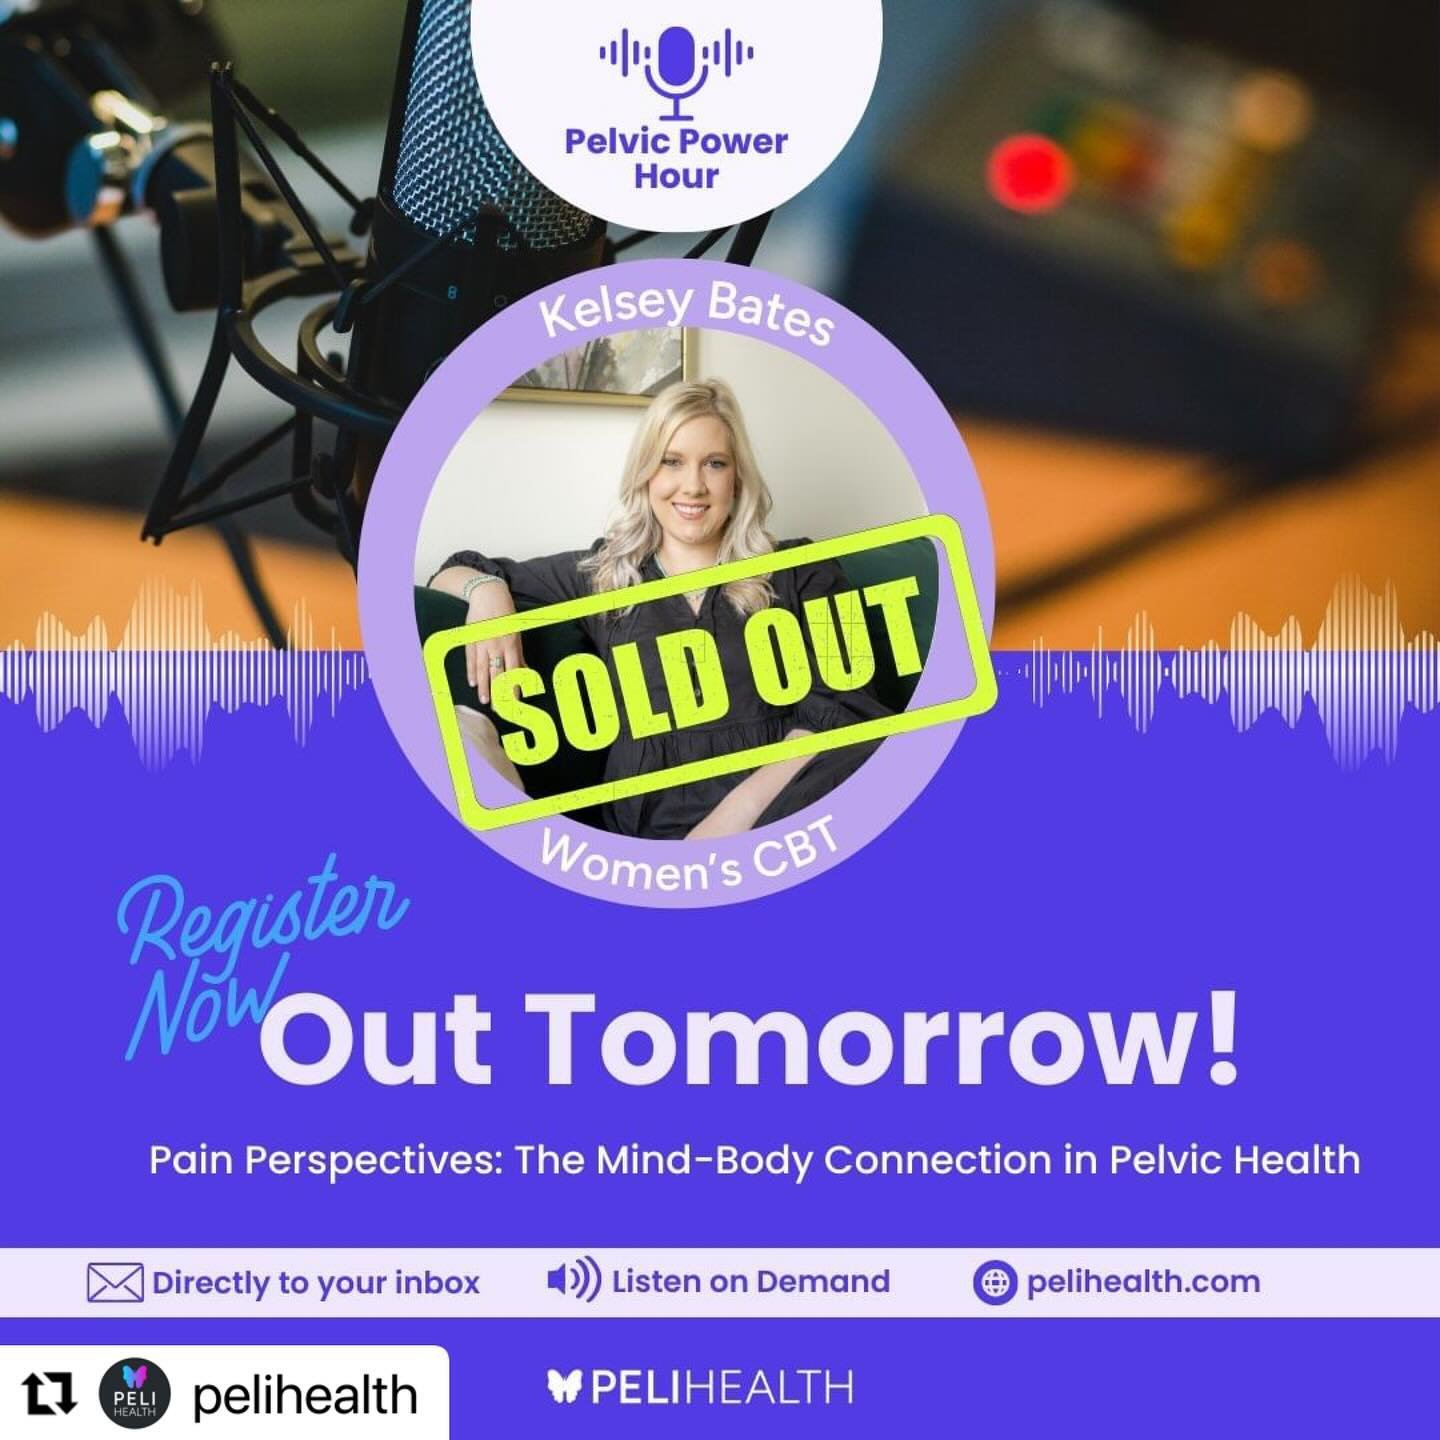 #Repost @pelihealth with @use.repost
・・・
✨ Our Eventbrite tickets flew off the shelves, but don&rsquo;t fret! We&rsquo;re opening up a few extra spots directly through our website. Get in quick!

🌟 Get ready to dive deep into managing chronic health